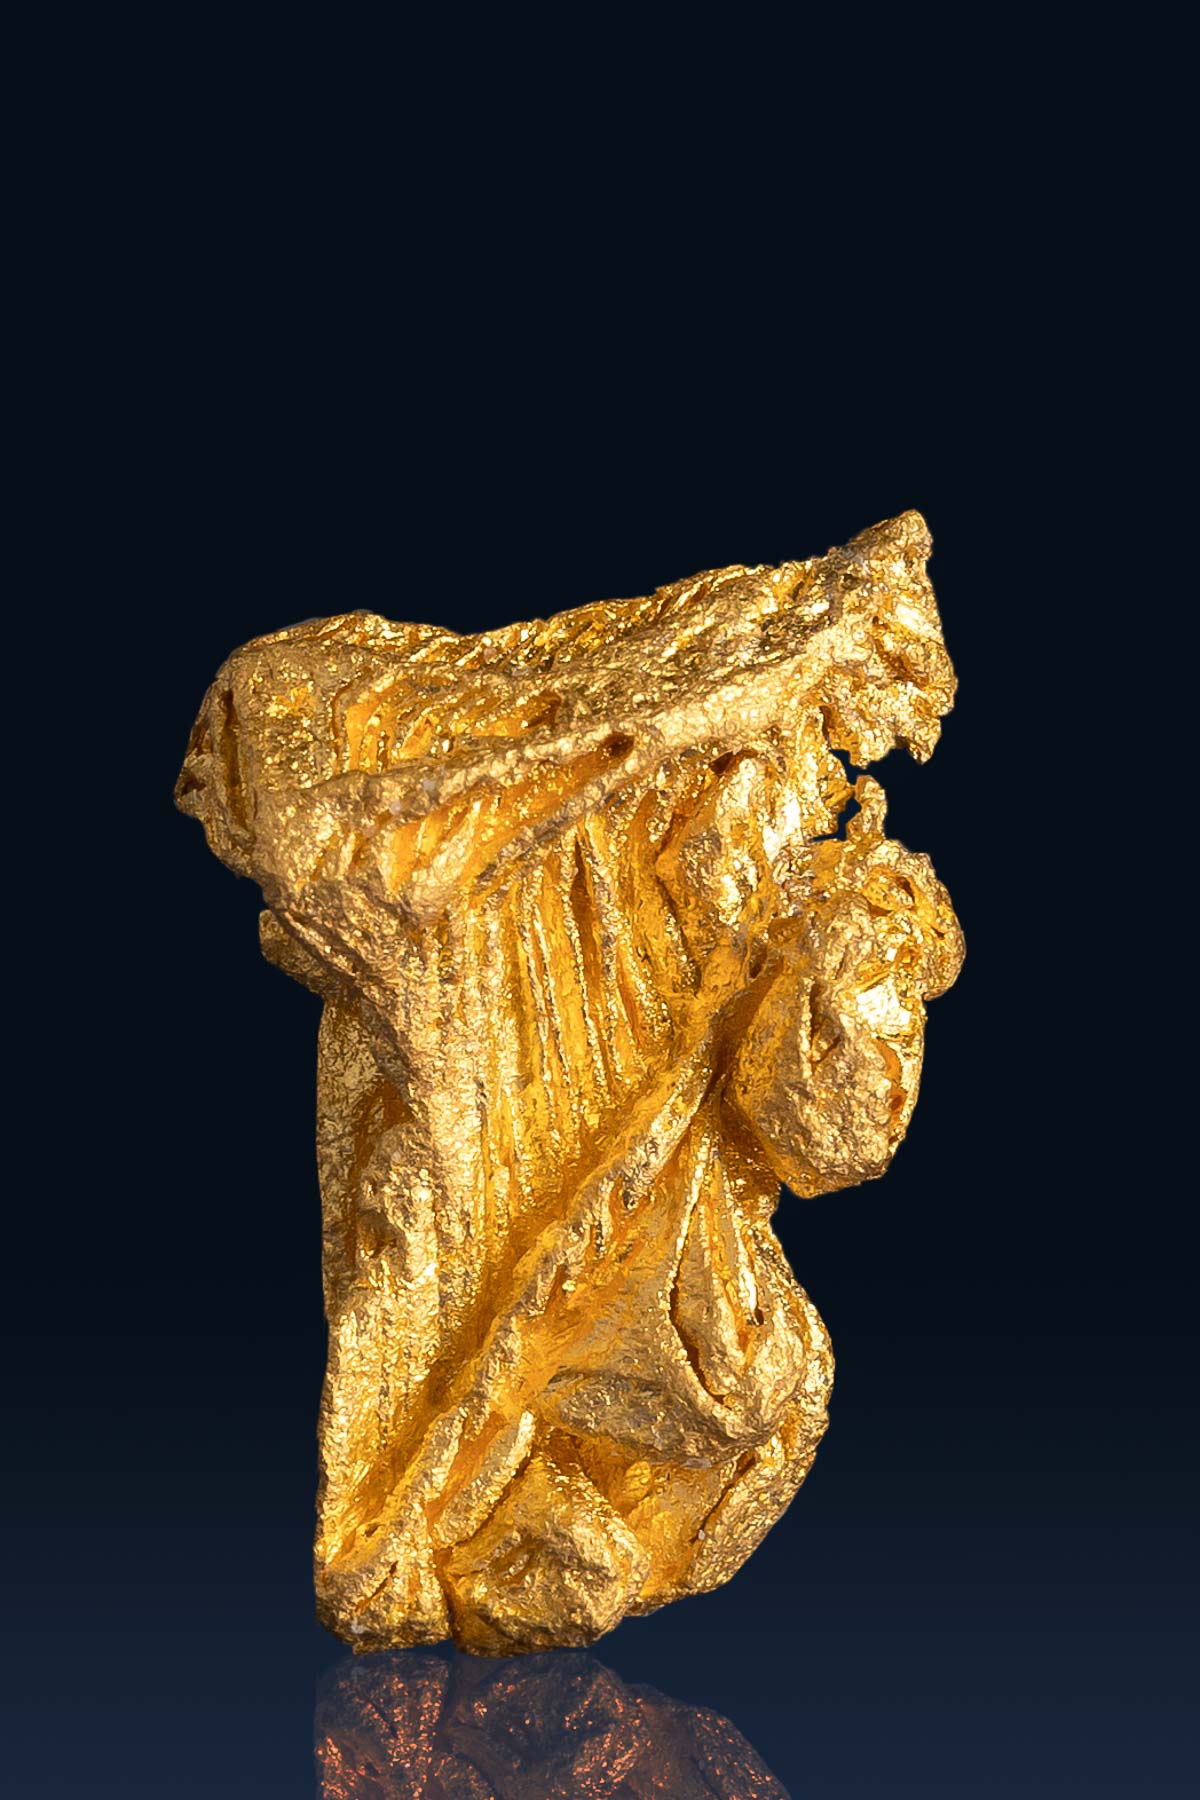 Beautifully Striated Crystallized Gold Nugget - Pontes, Brazil